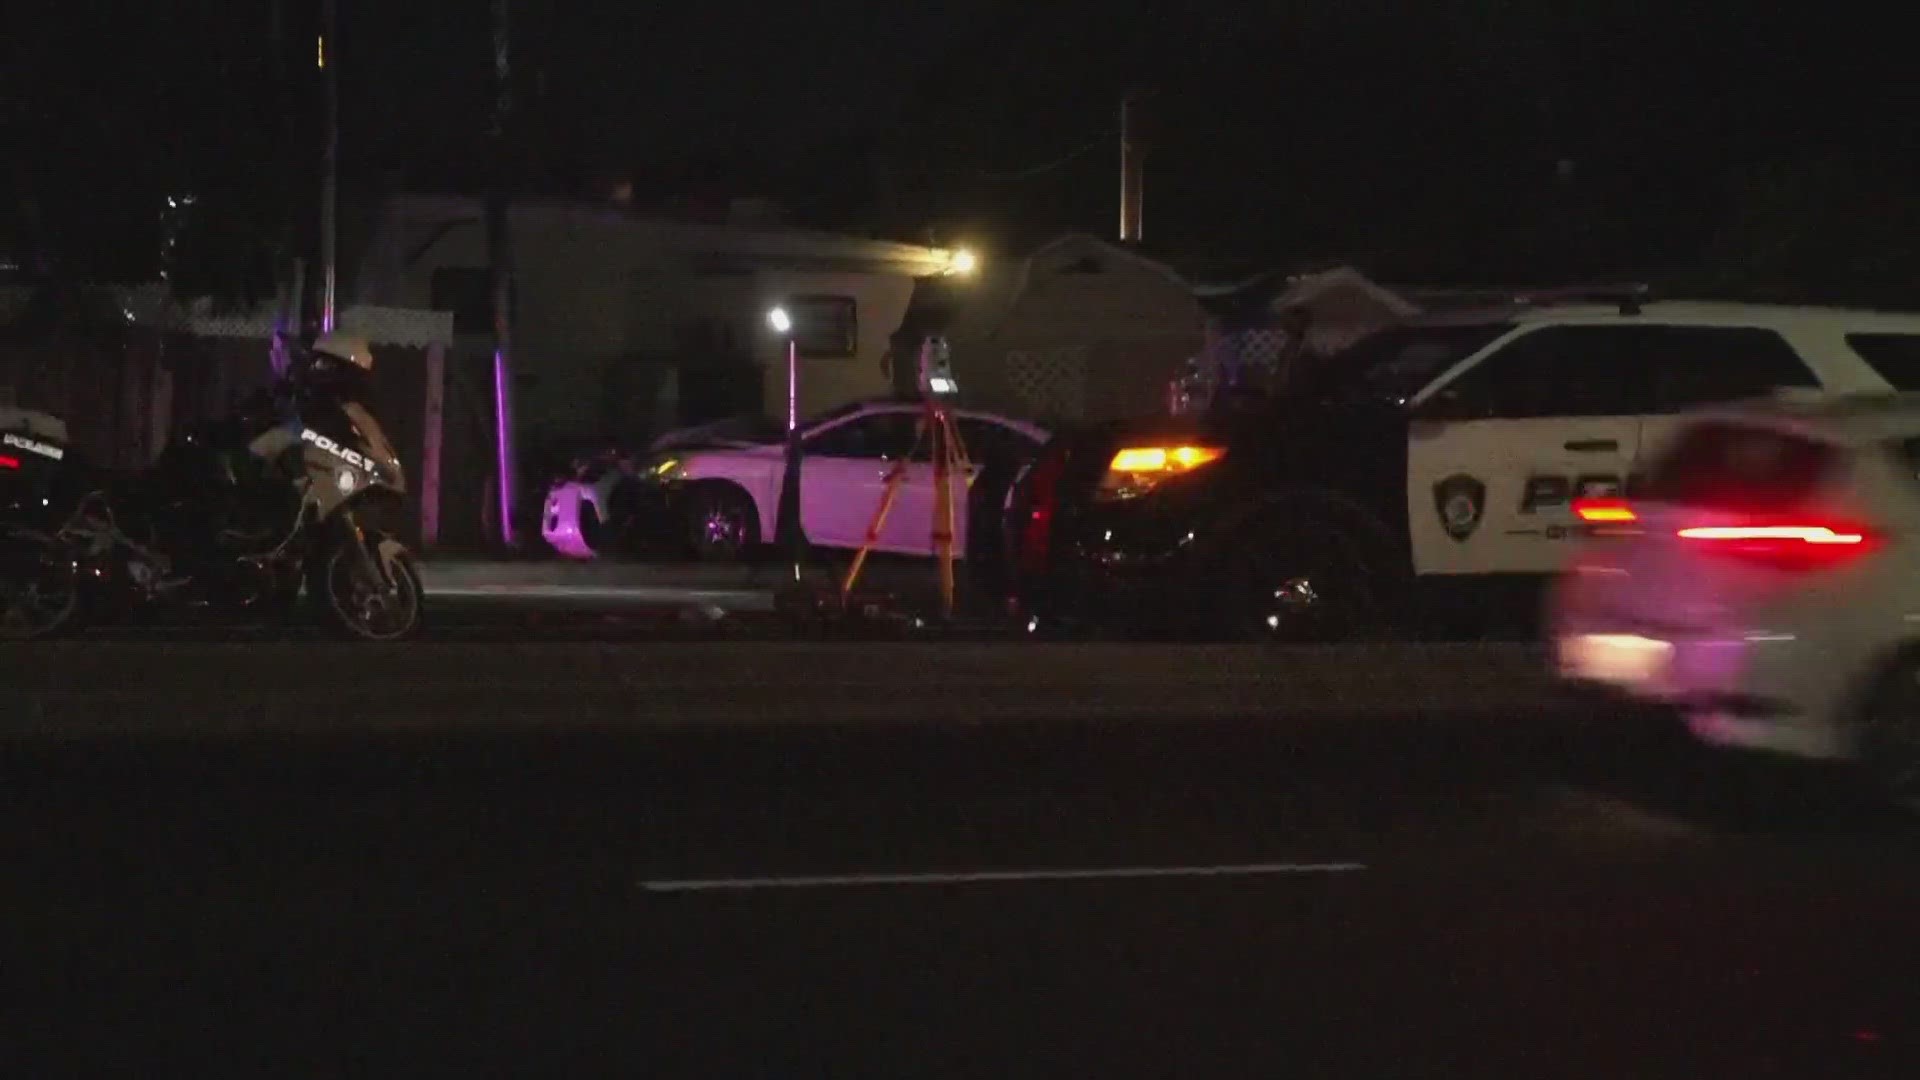 Authorities have closed down a portion of Antelope Road after a deadly accident in Citrus Heights.